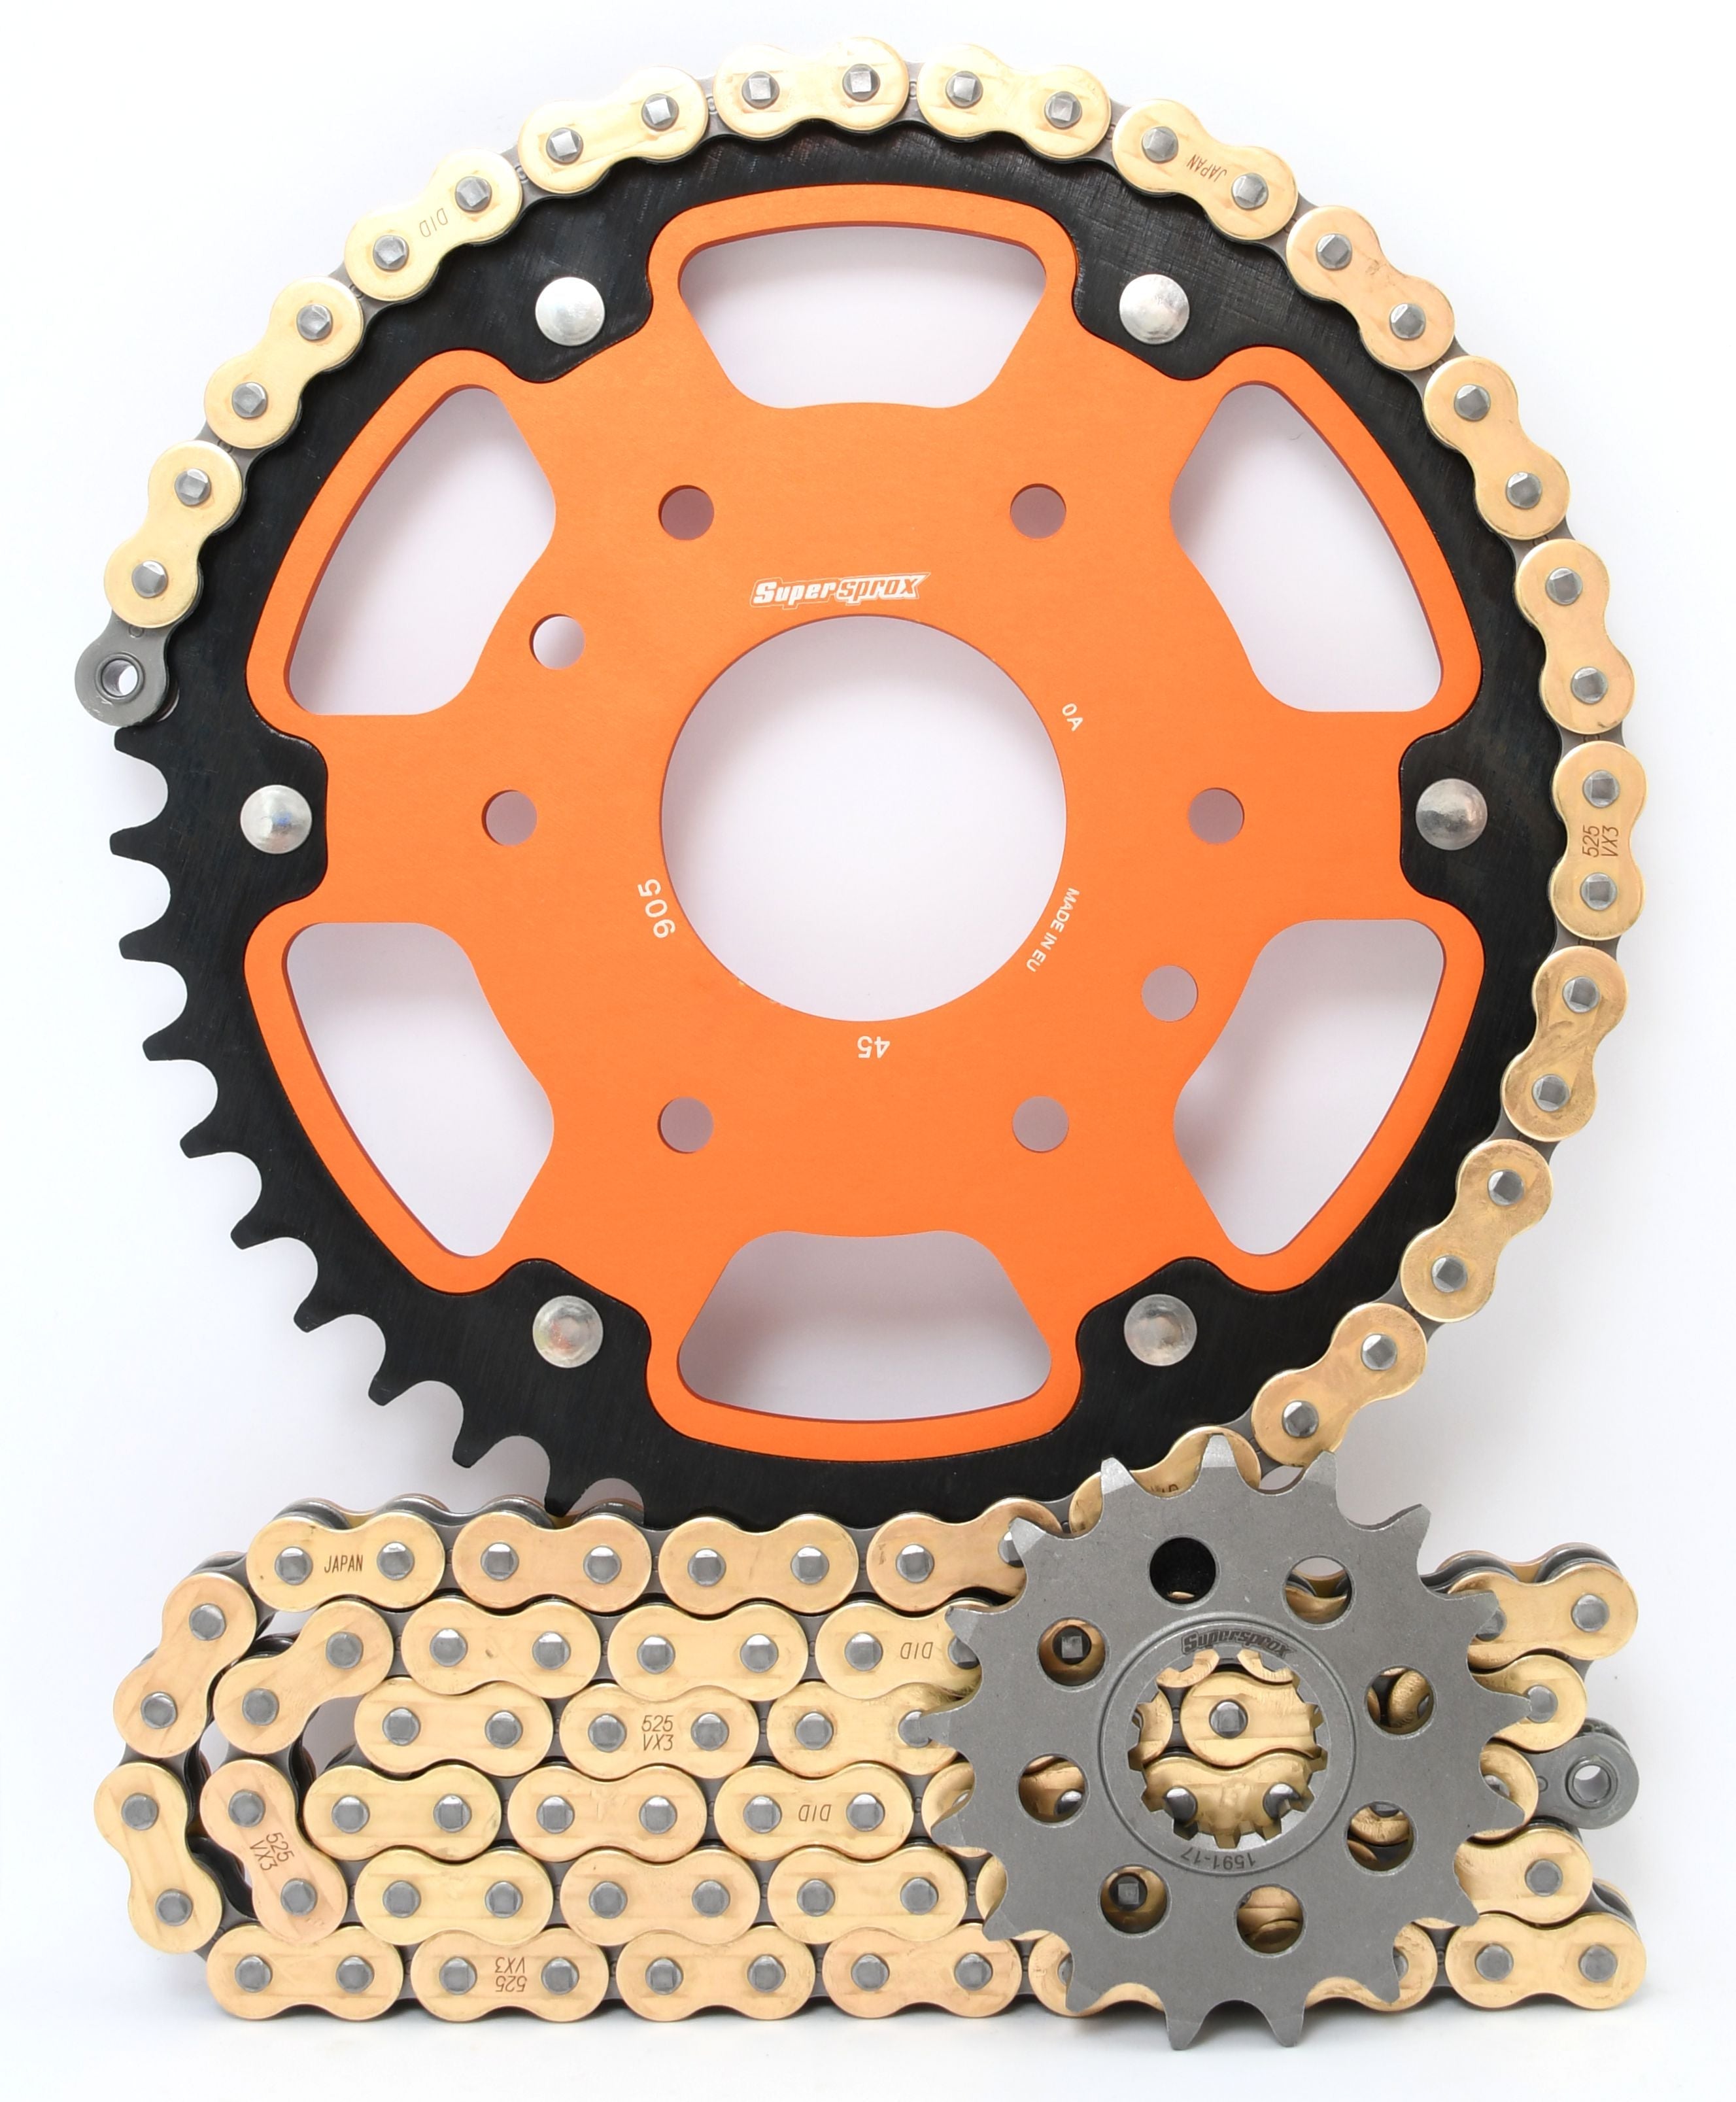 Supersprox Chain & Stealth Sprocket Kit for KTM 200 RC and Duke - Standard Gearing